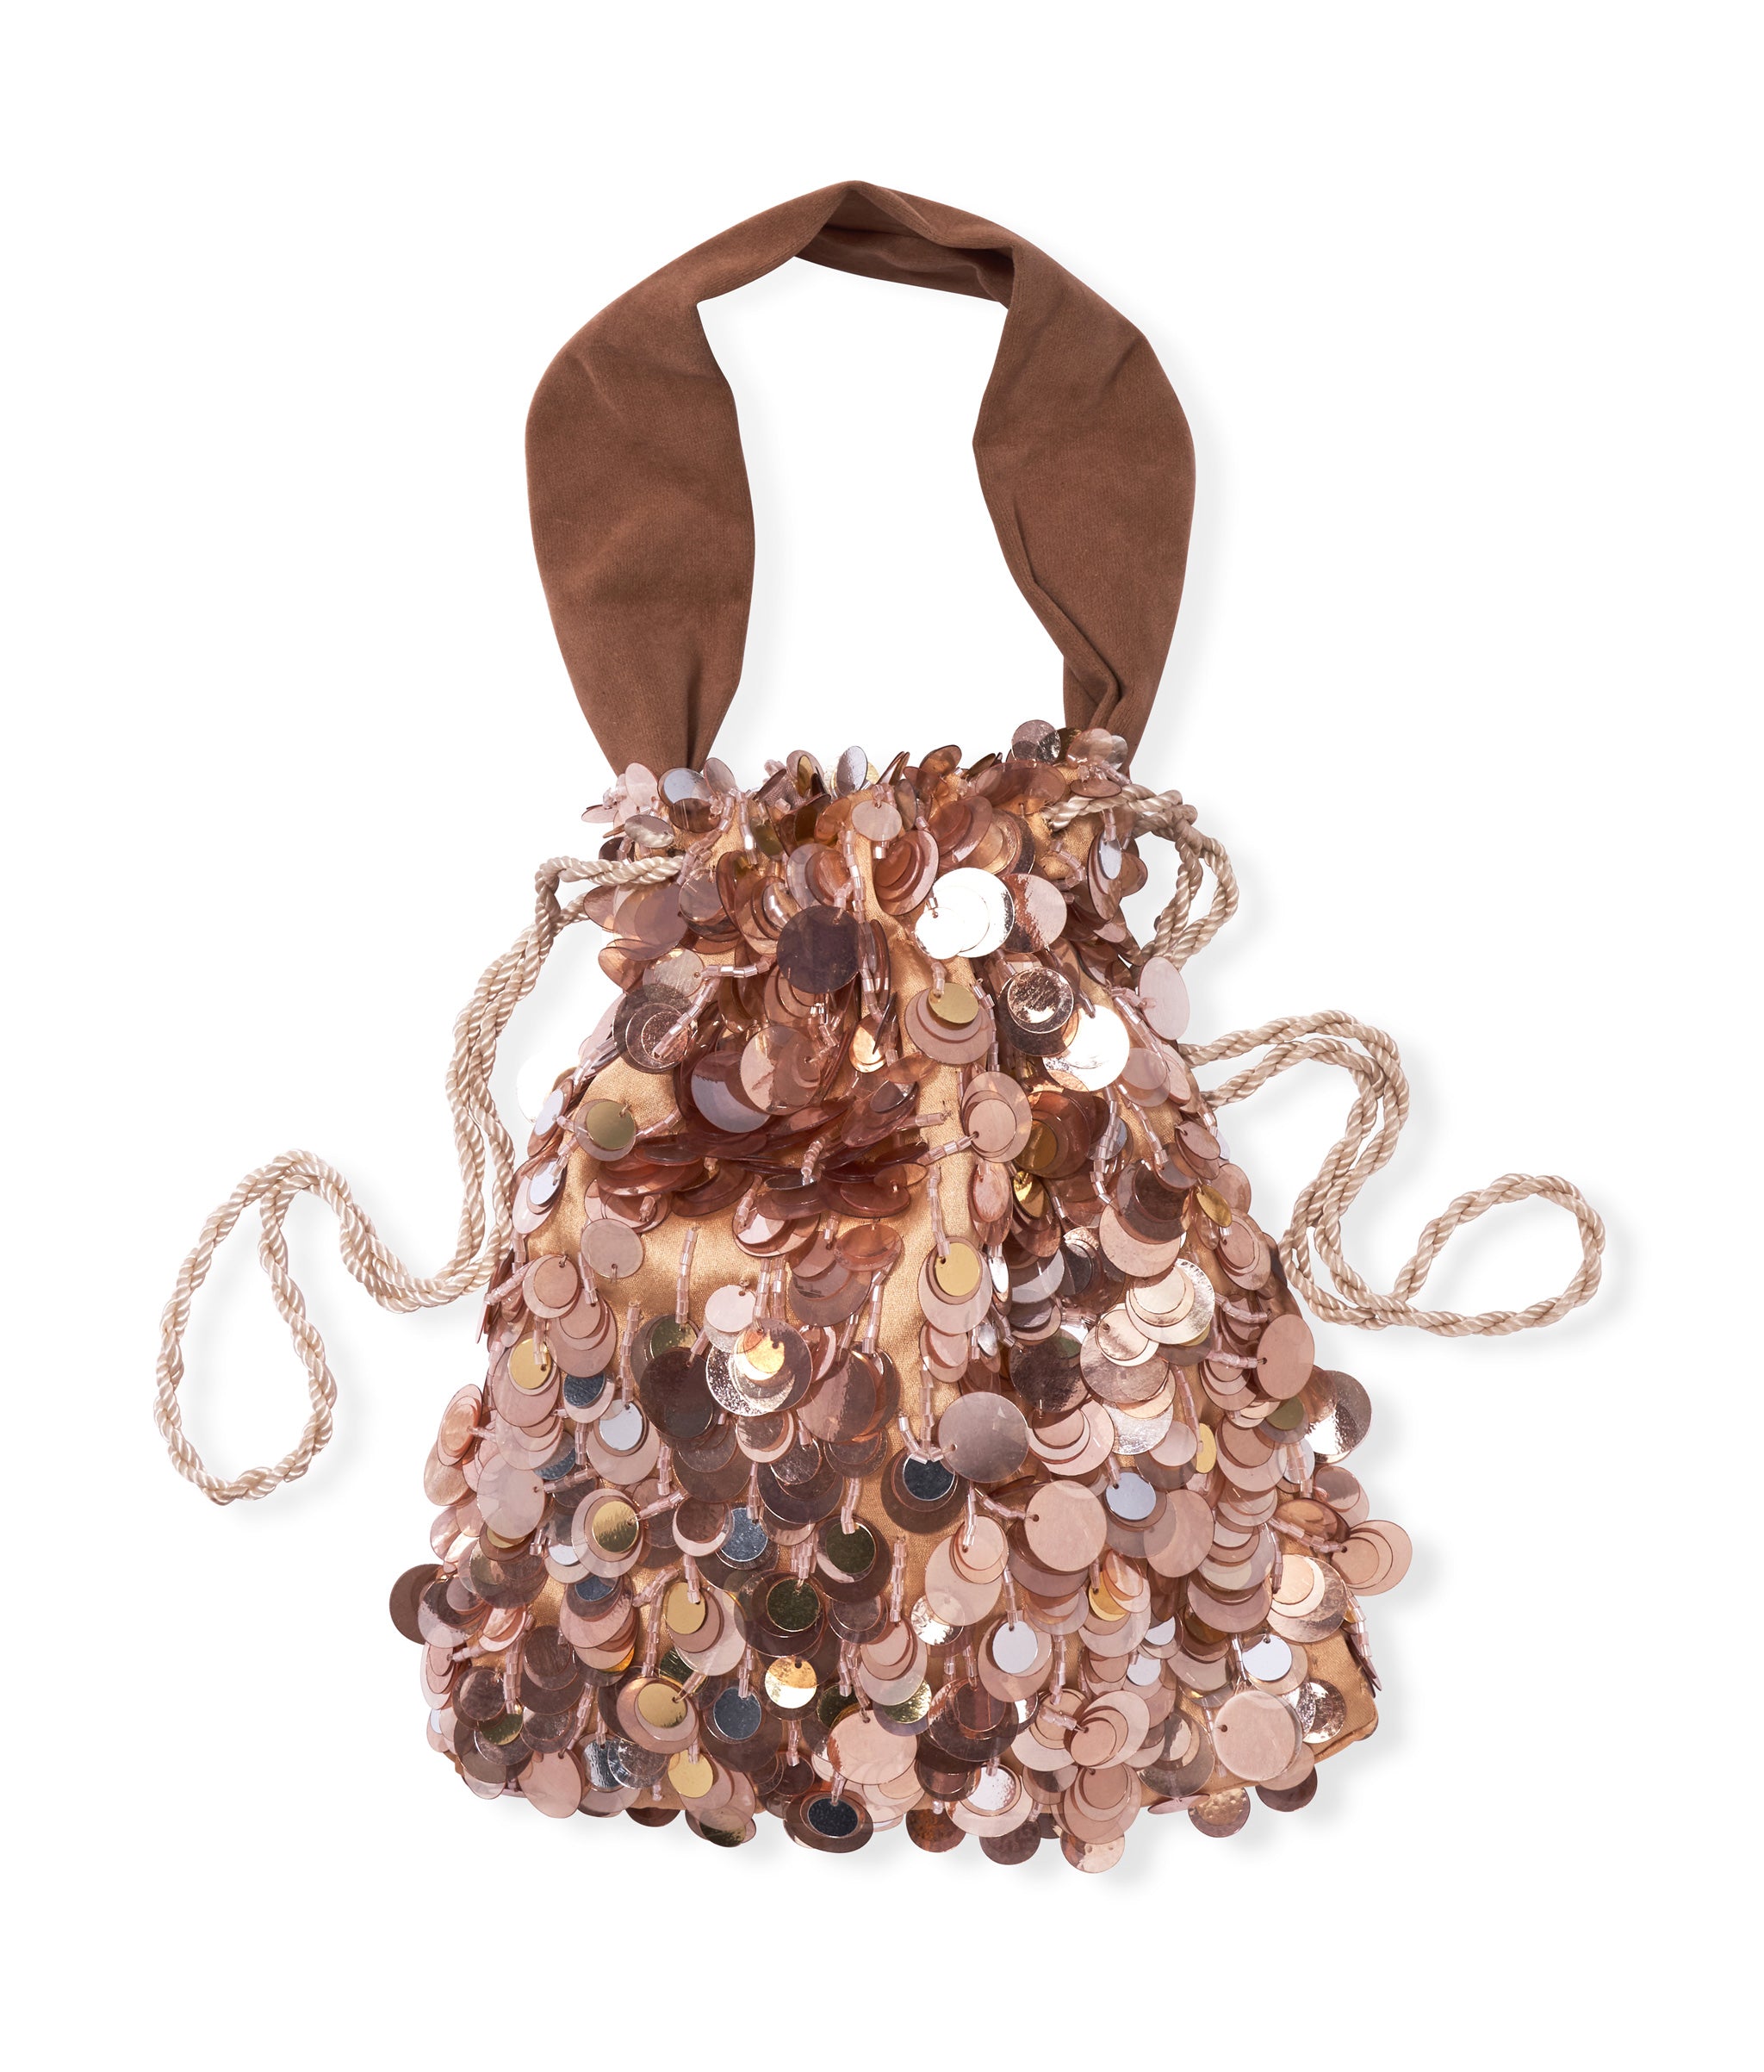 Gala Bag in Champagne Sequin. Sequined evening bag with tan velvet top handle and drawstring cord closure.